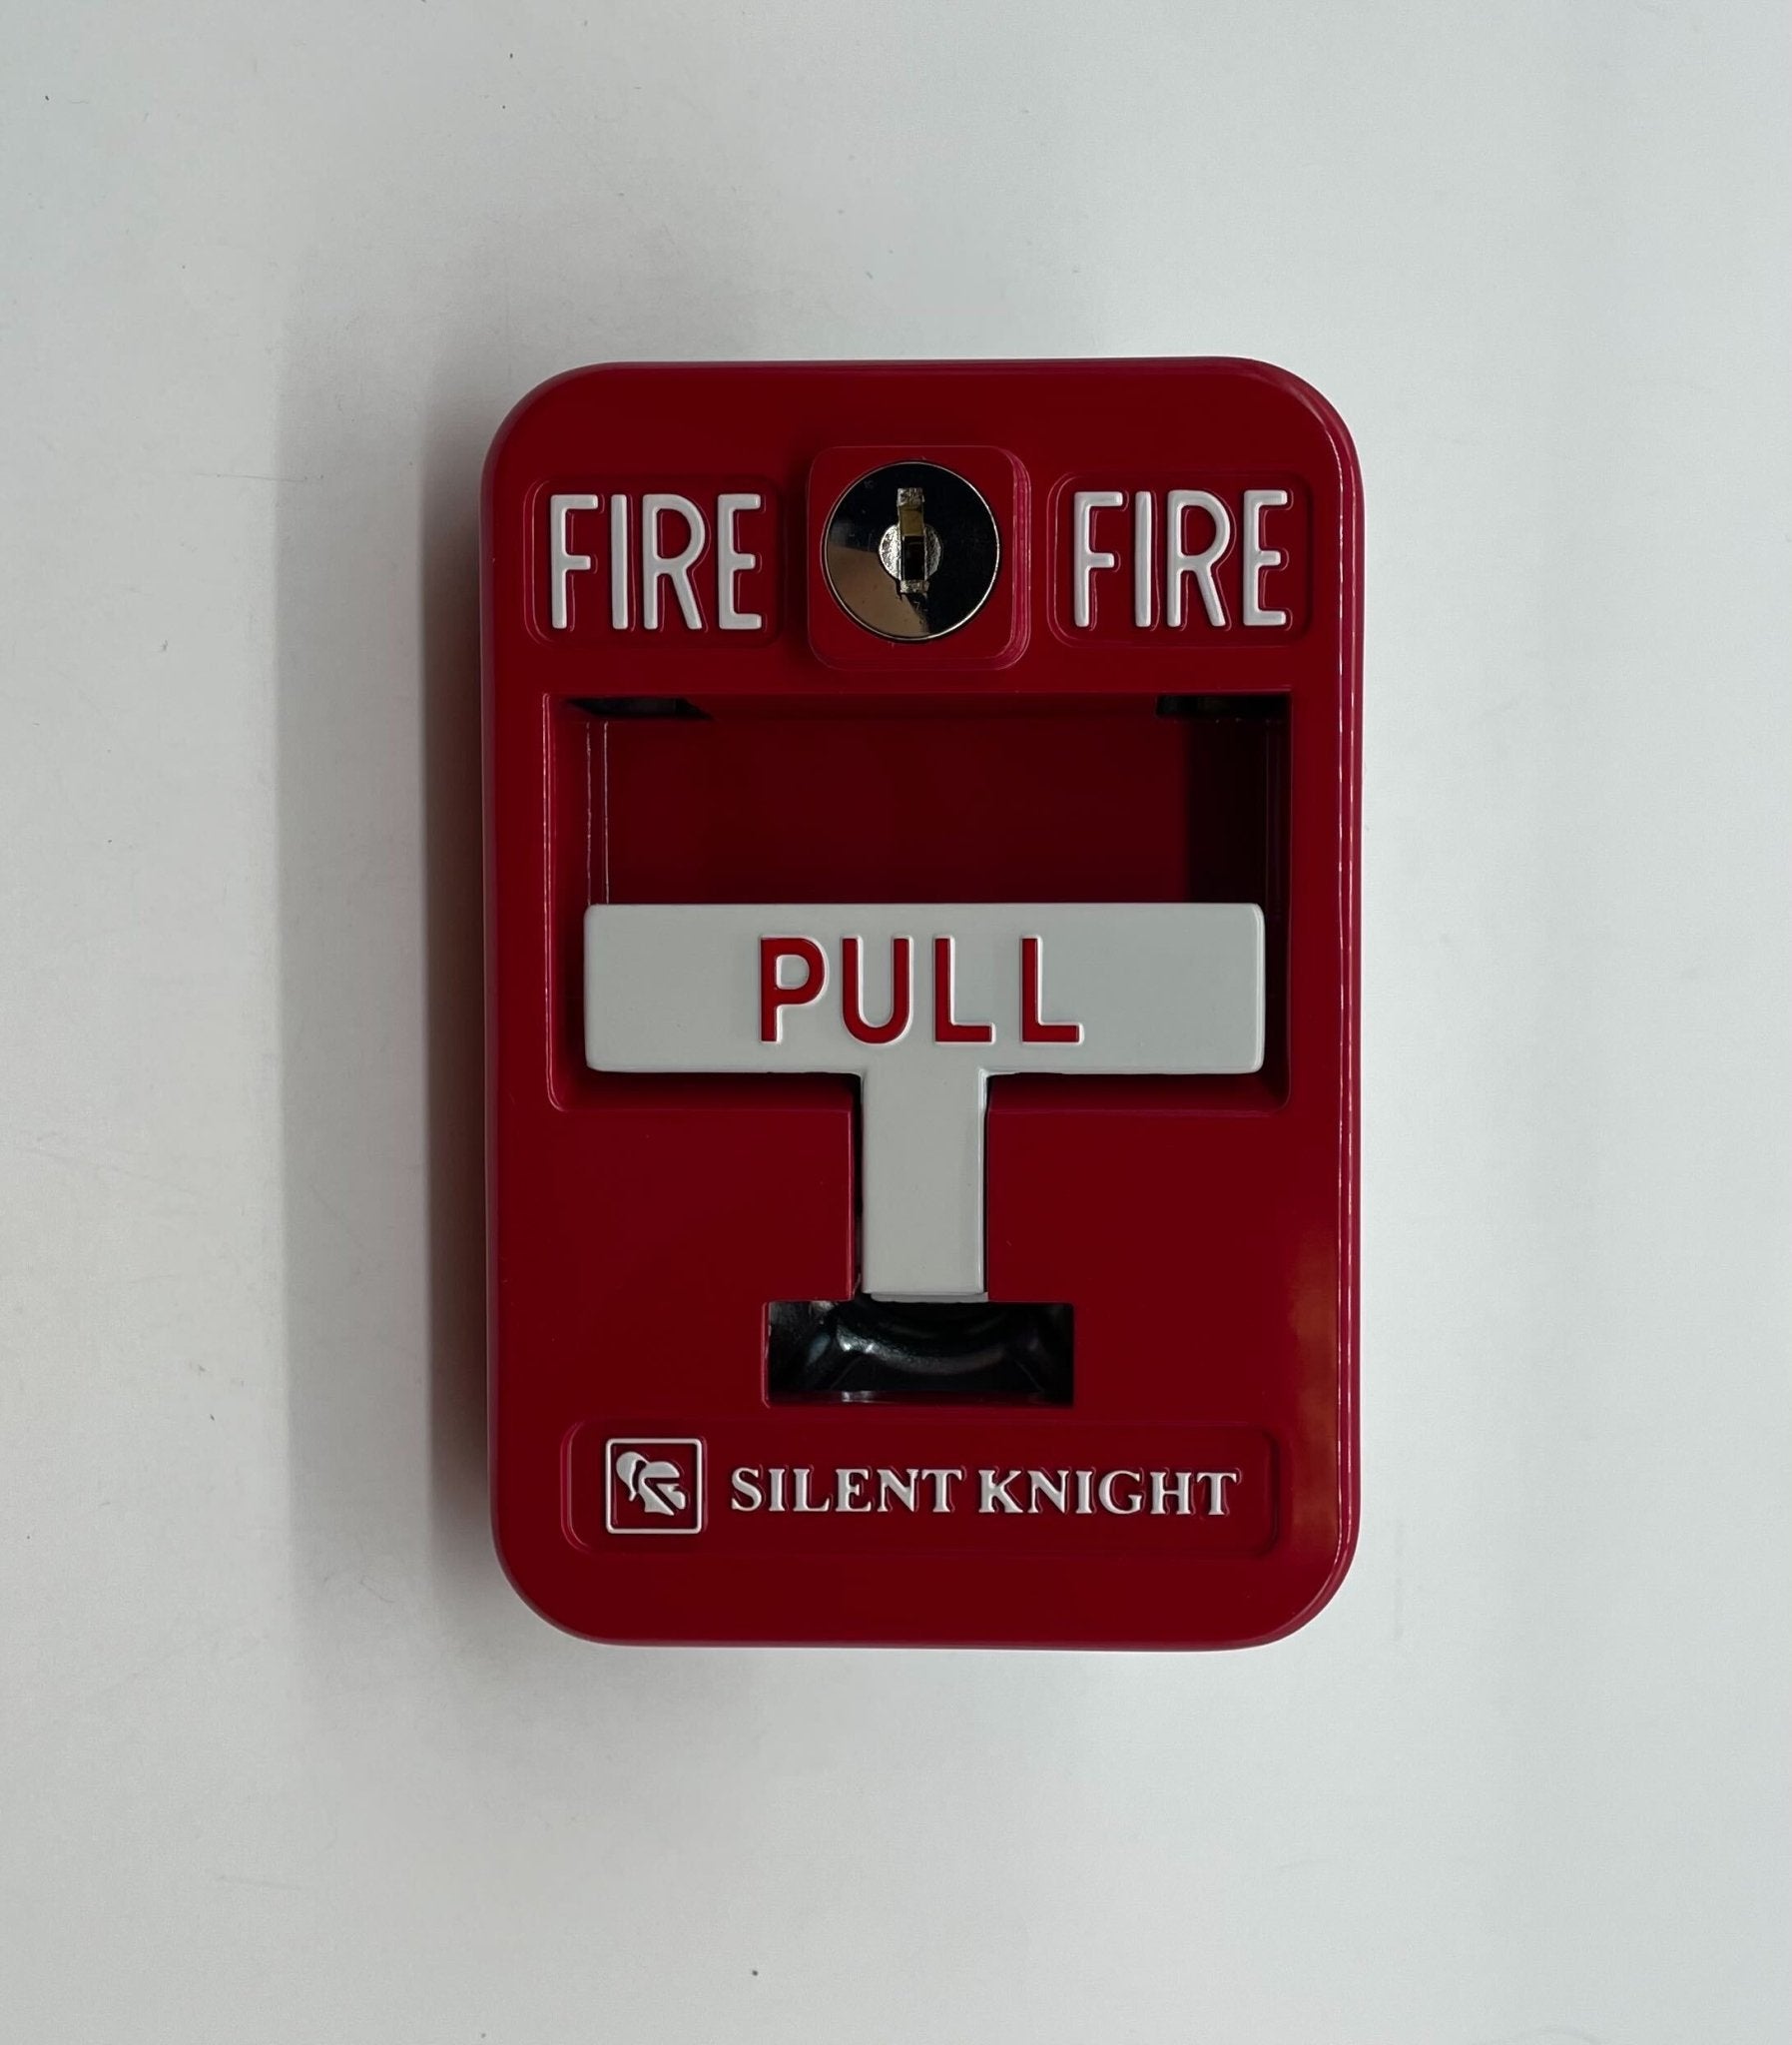 Silent Knight PS-SATK Single Action Pull Station - The Fire Alarm Supplier